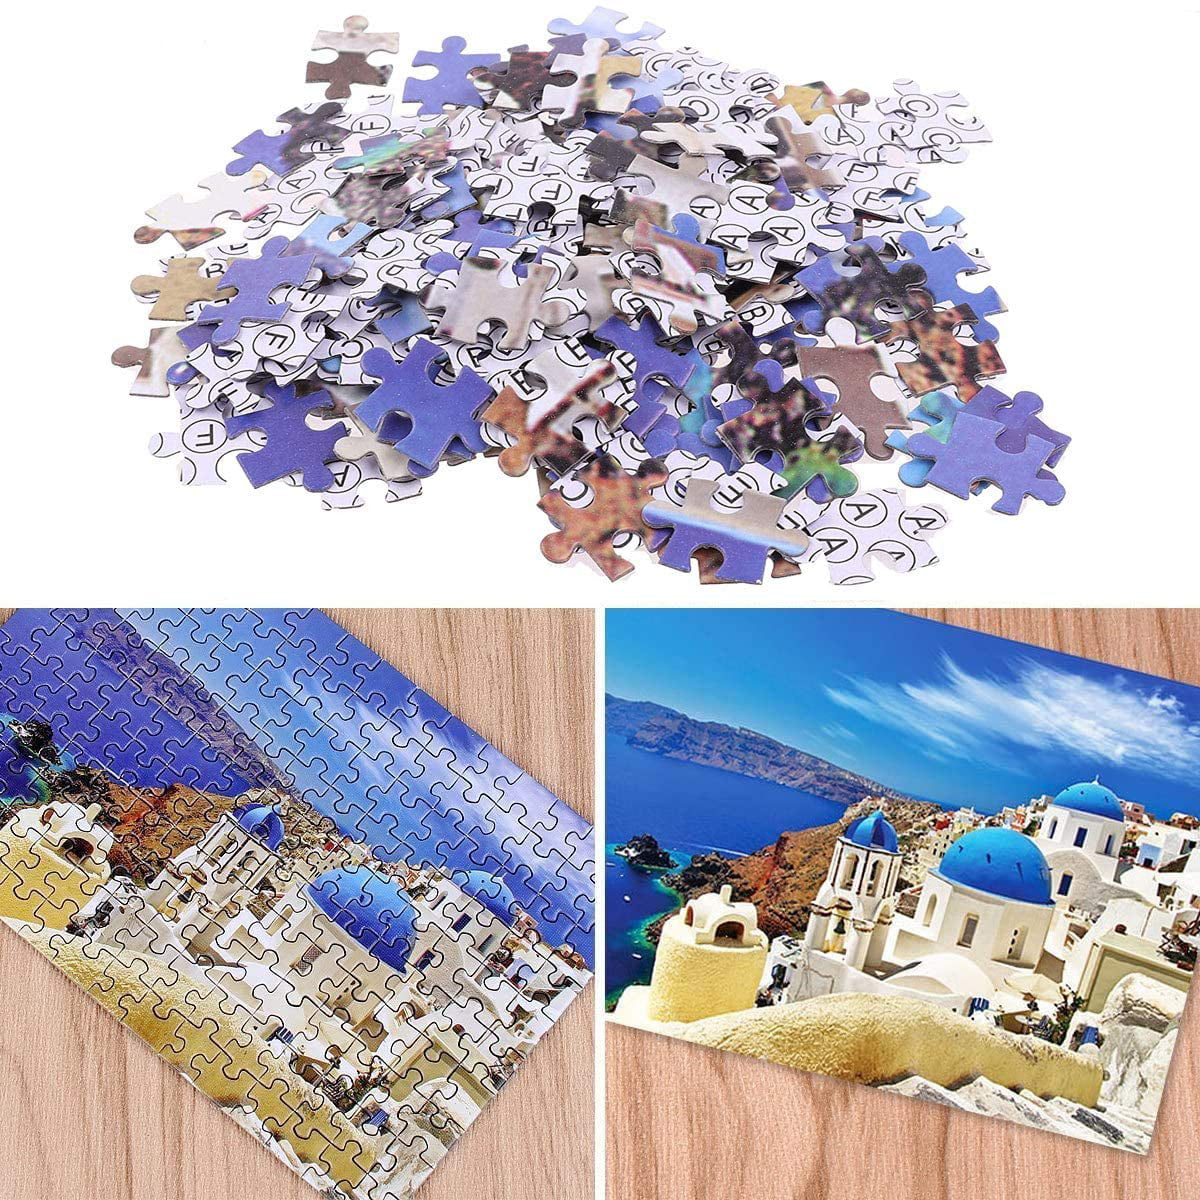 Aegean Sea 500 Pcs Jigsaw Puzzle Toy Educational Puzzle Game for Kids Adults 